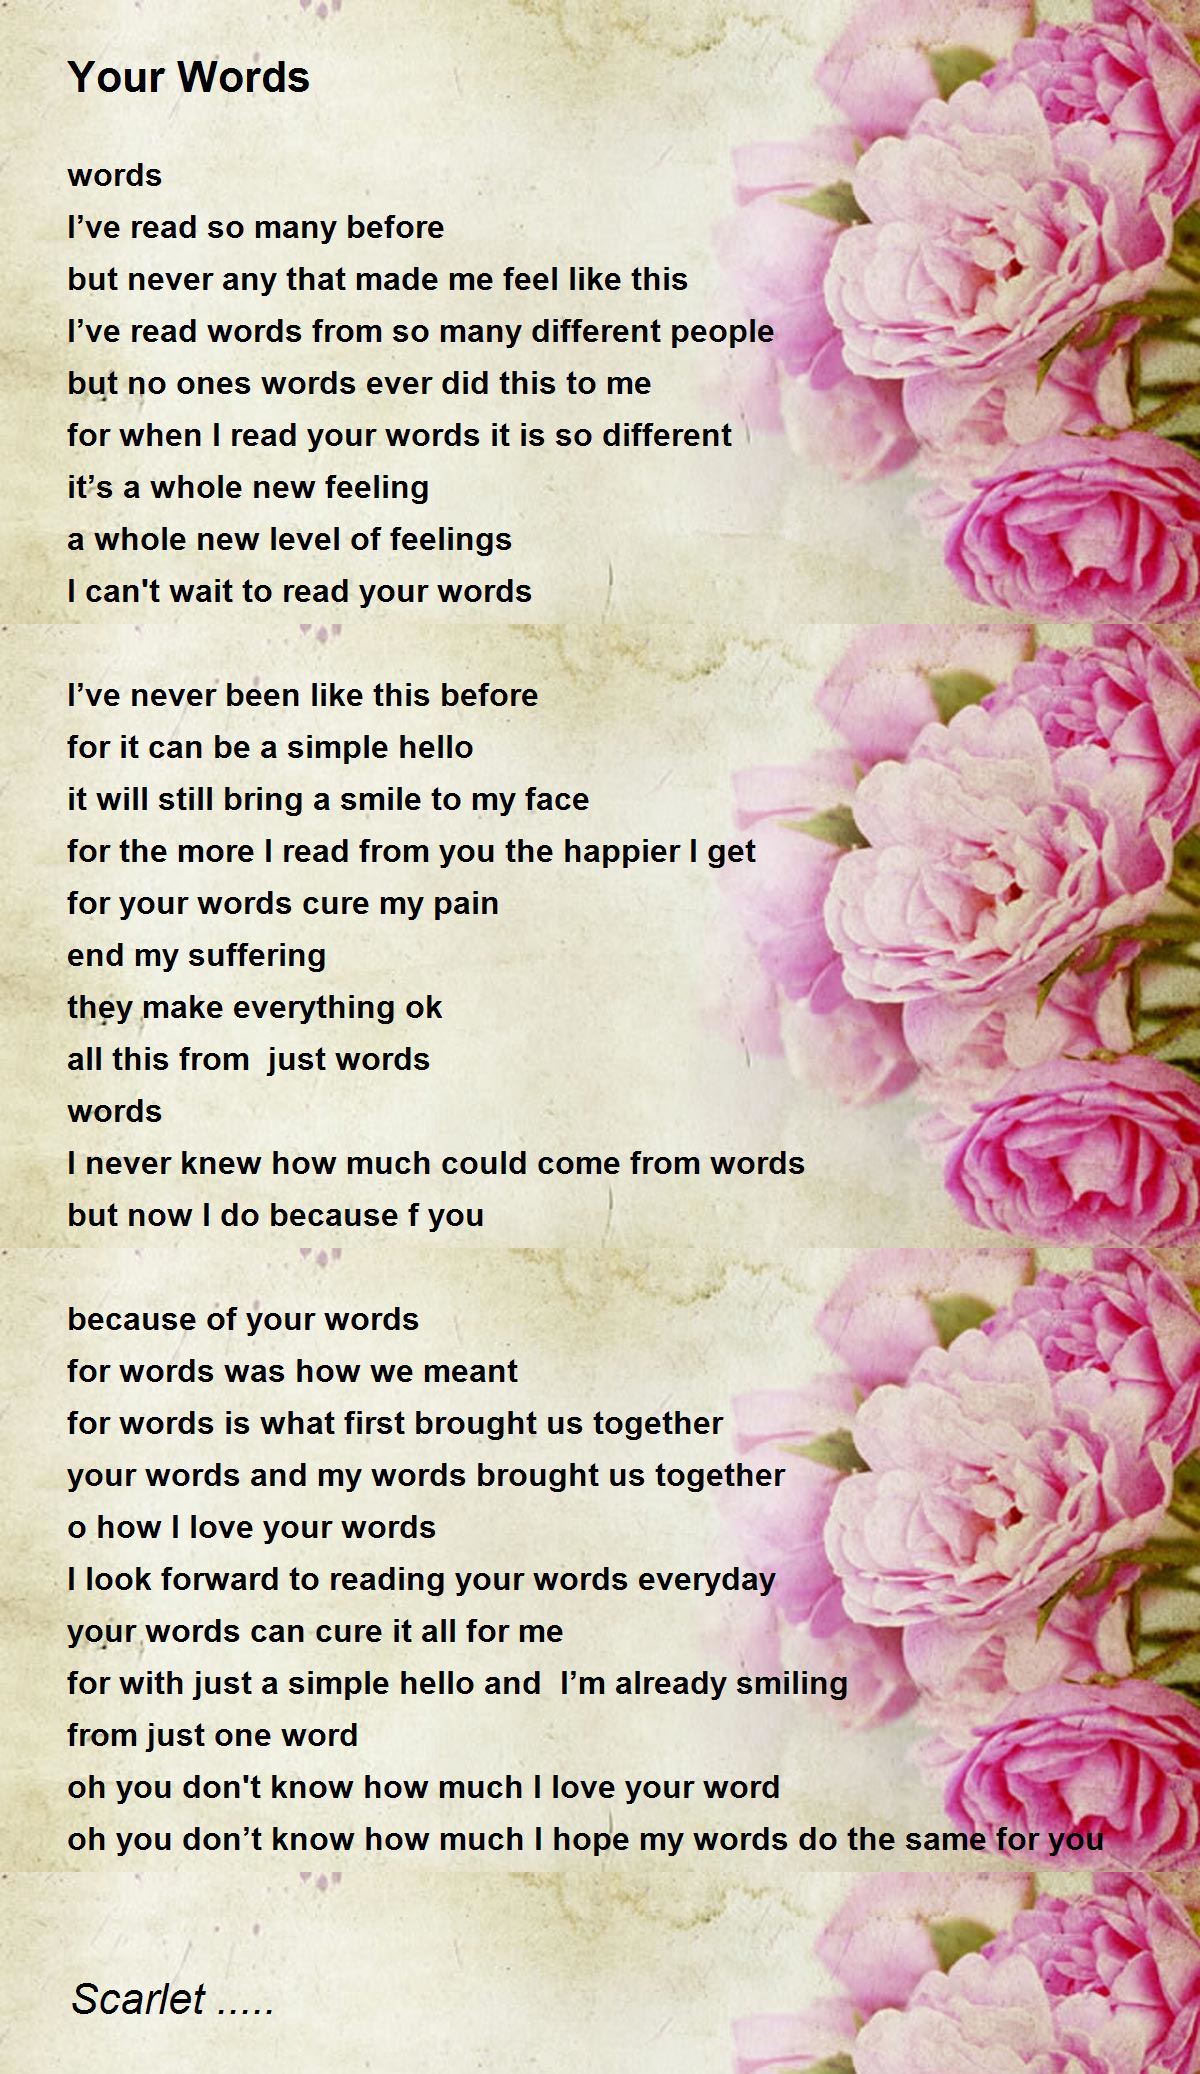 Your Words - Your Words Poem by Scarlet .....